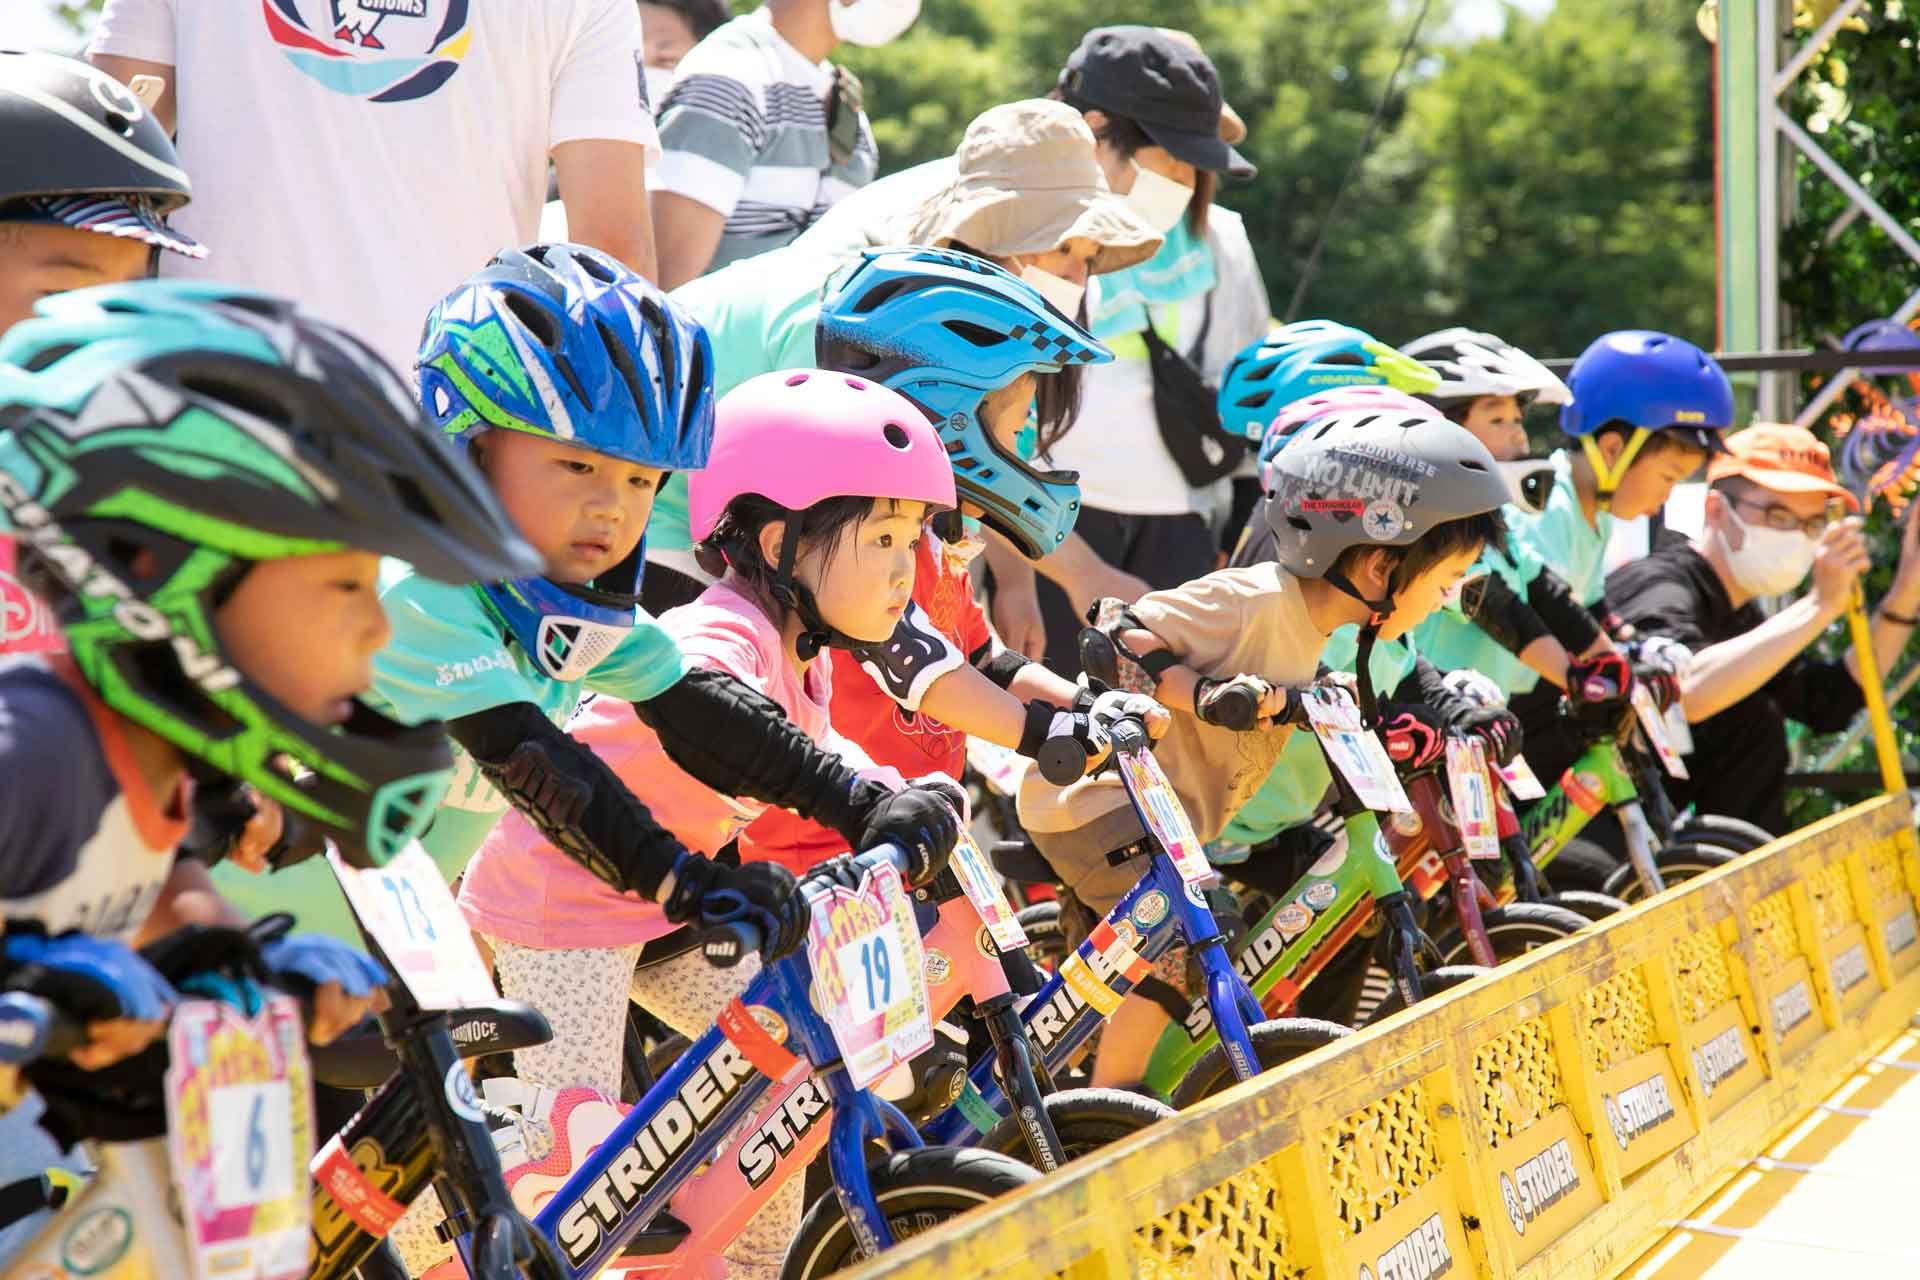 Racers stare forward at the starting gate of a Strider Cup race